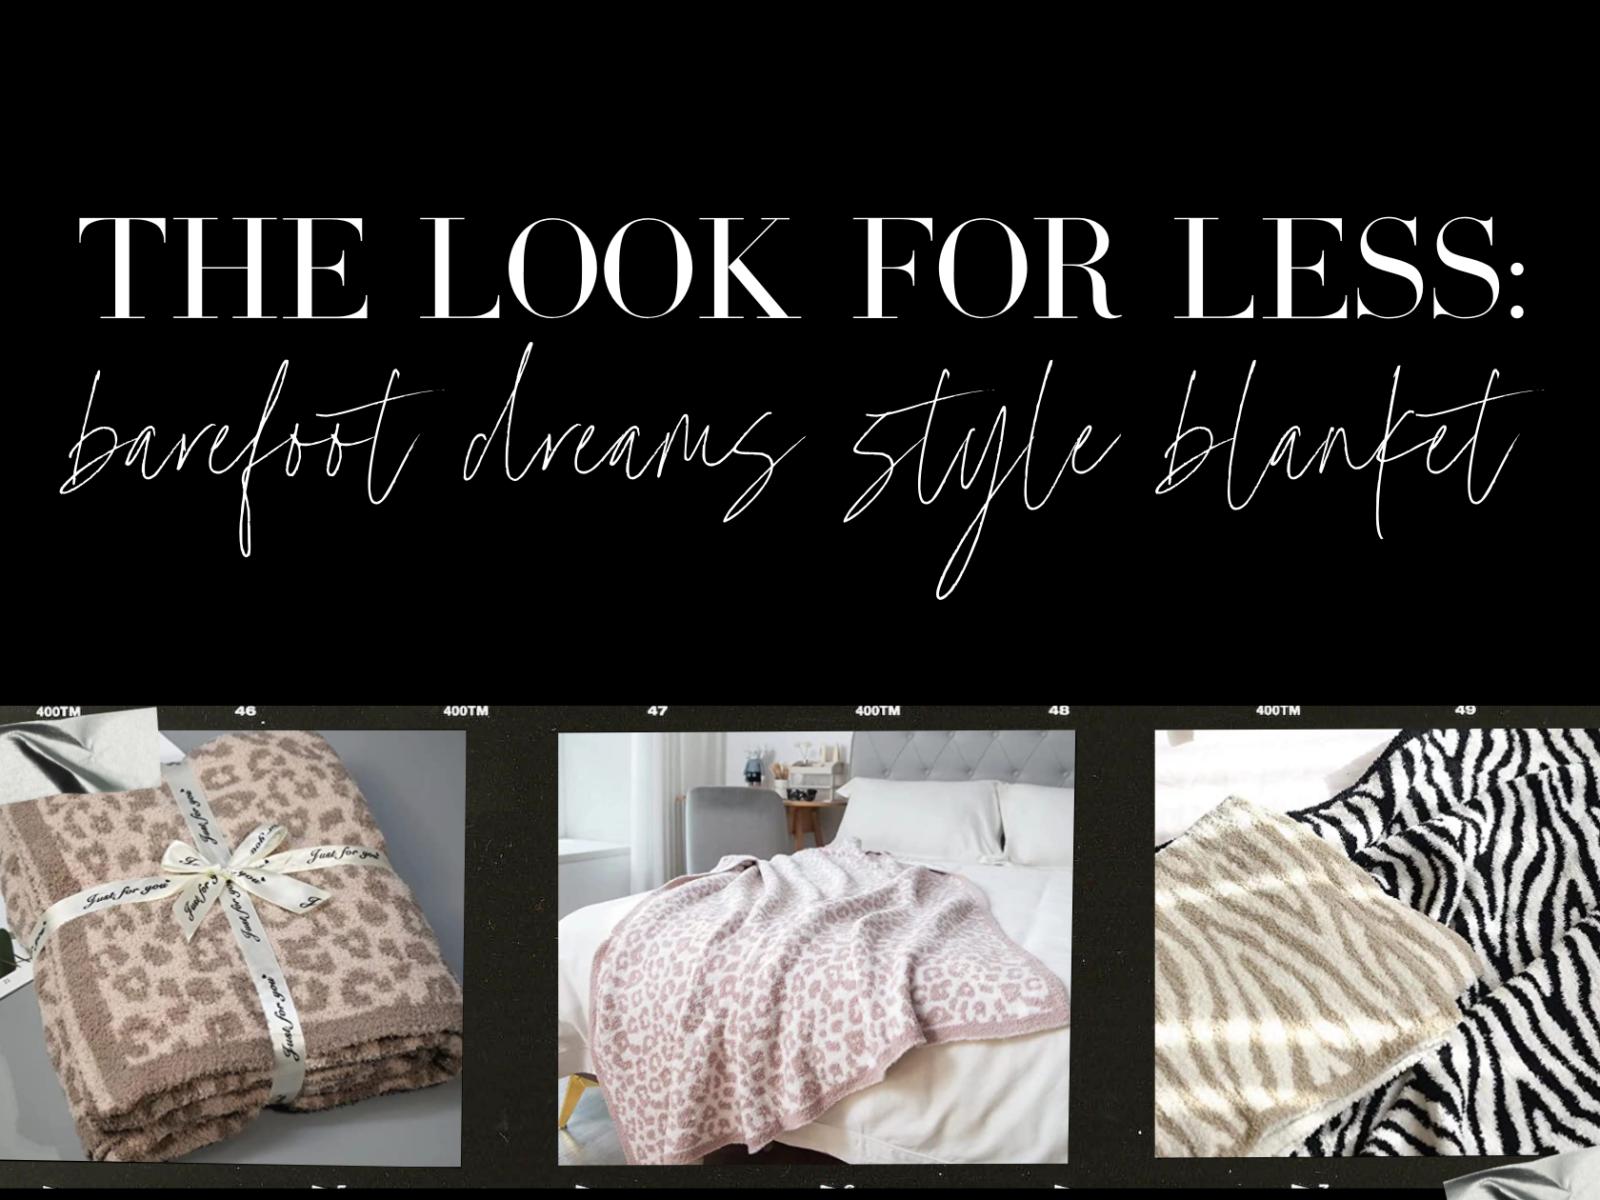 the look for less: Barefoot Dreams Style Blanket from Amazon